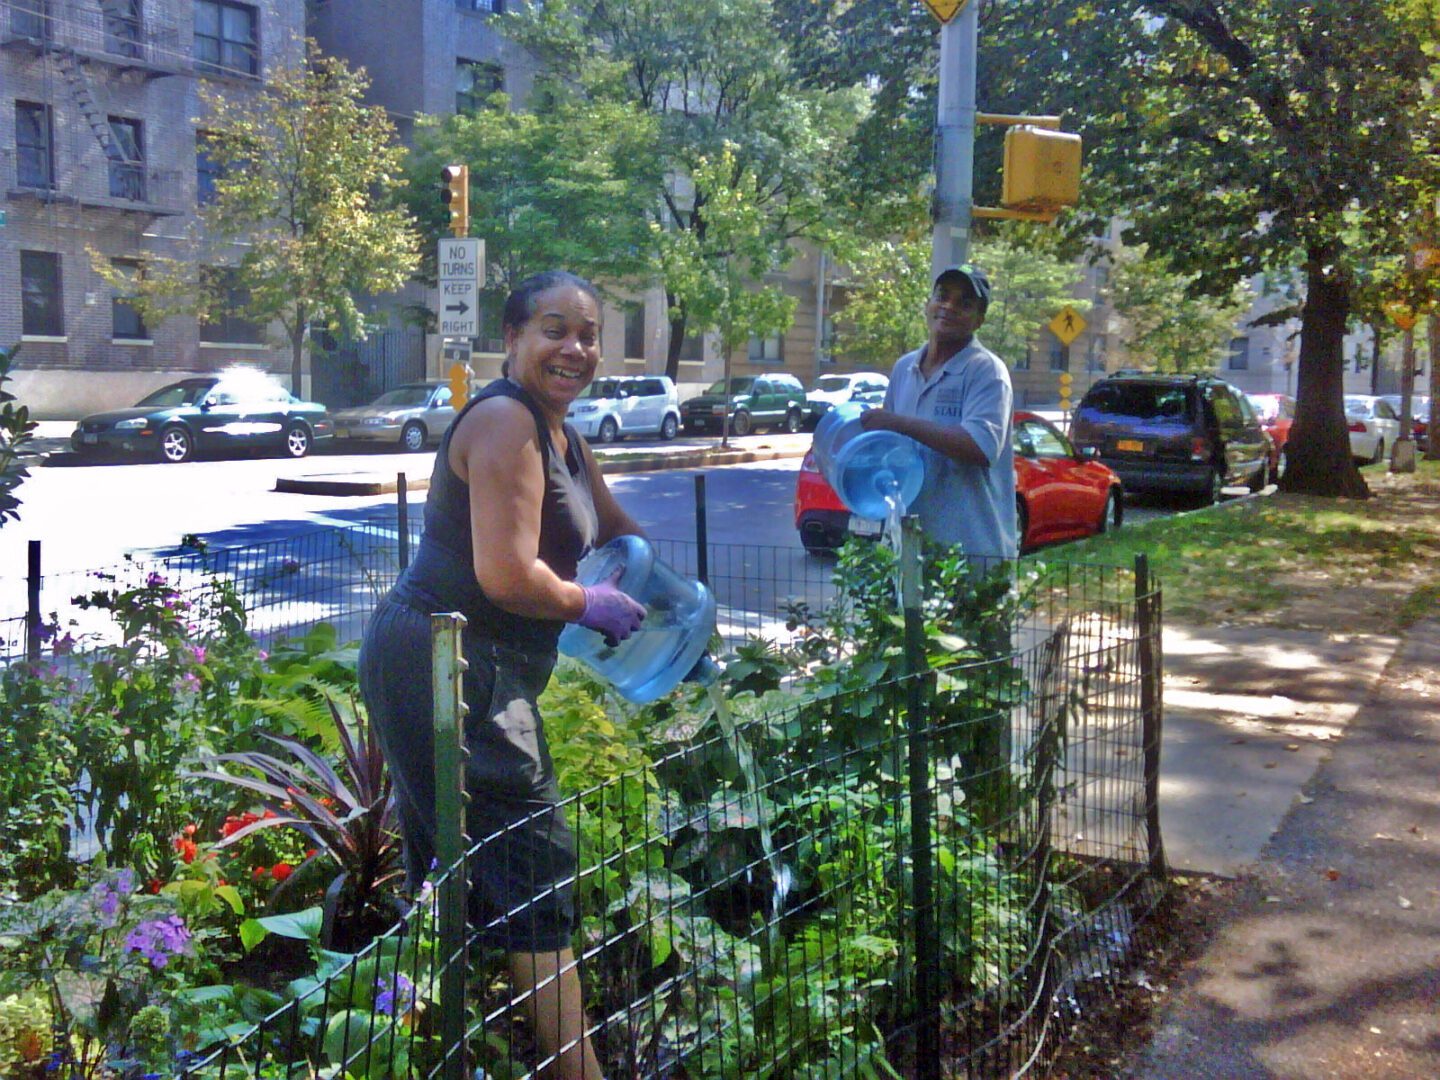 Volunteer and Gardener work together to water a garden on 149th Street and Riverside Drive